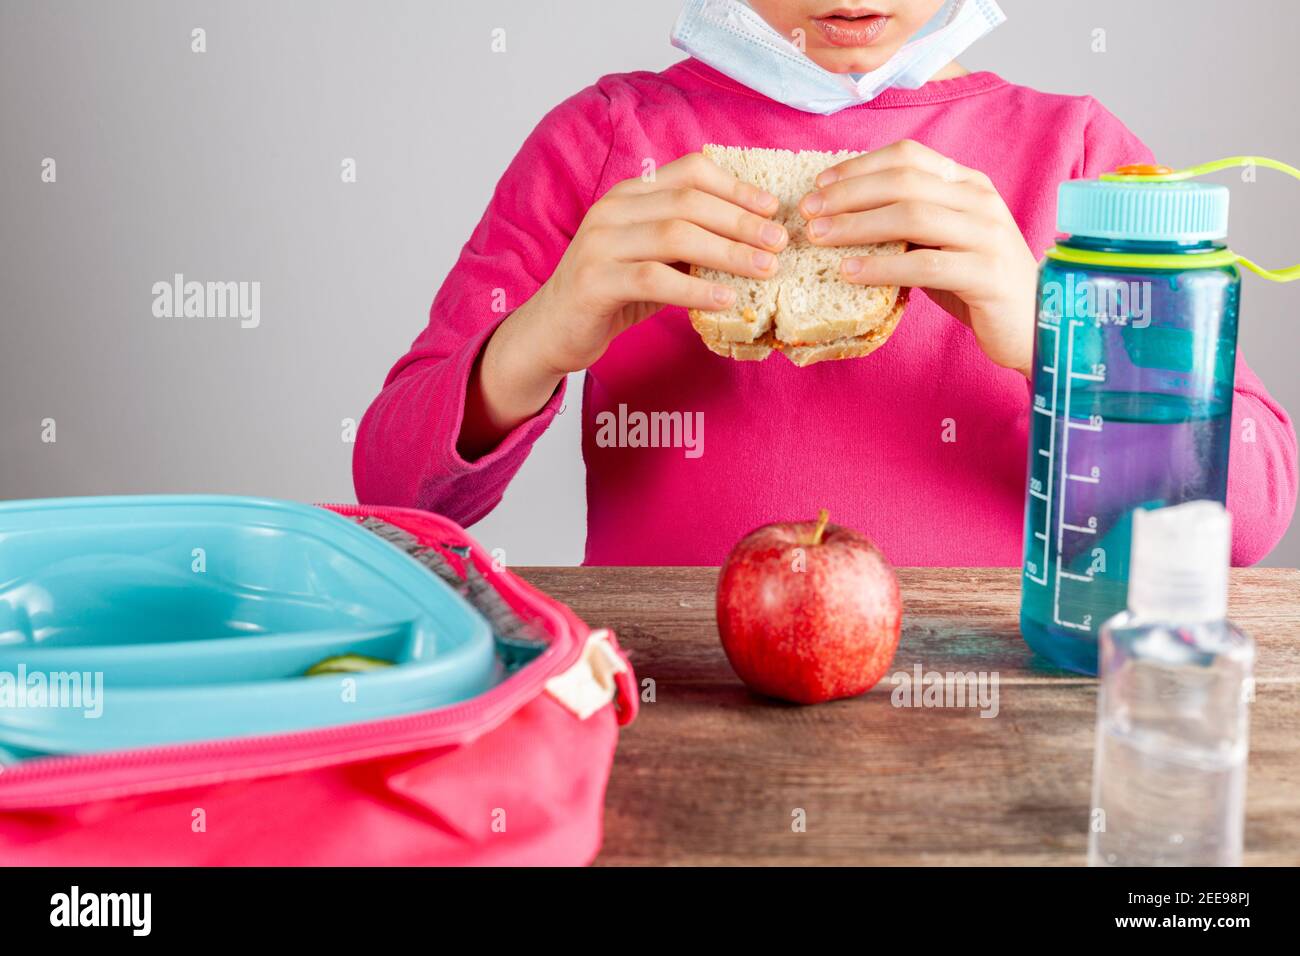 Closeup image with eating lunch at school concept during the phased reopening after COVID-19 pandemic closures. Girl with face mask removed eats sandw Stock Photo